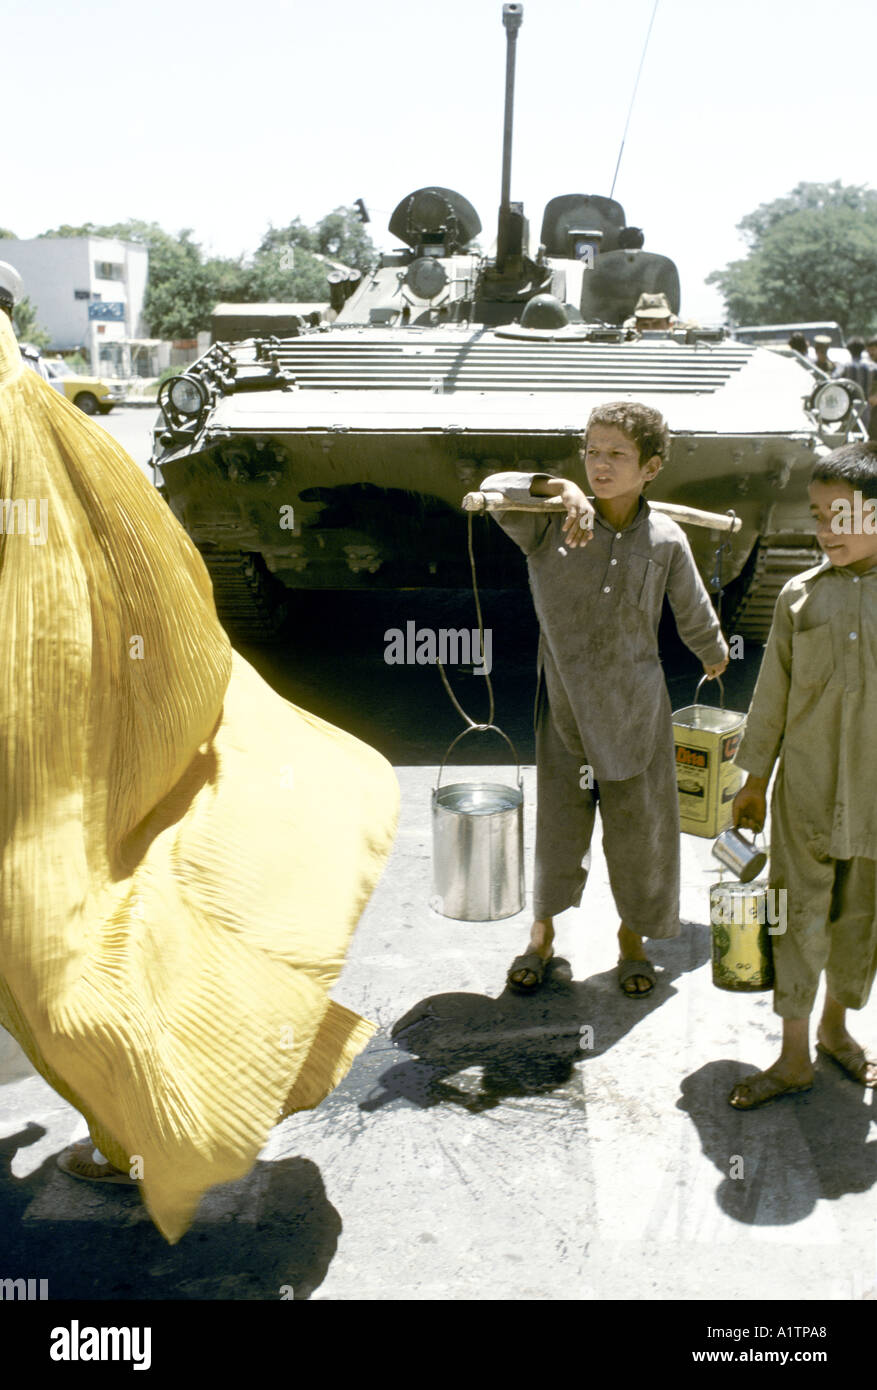 Soviet Afghanistan war - Page 6 Child-with-containers-of-water-in-front-of-soviet-tank-kabul-afghanistan-A1TPA8